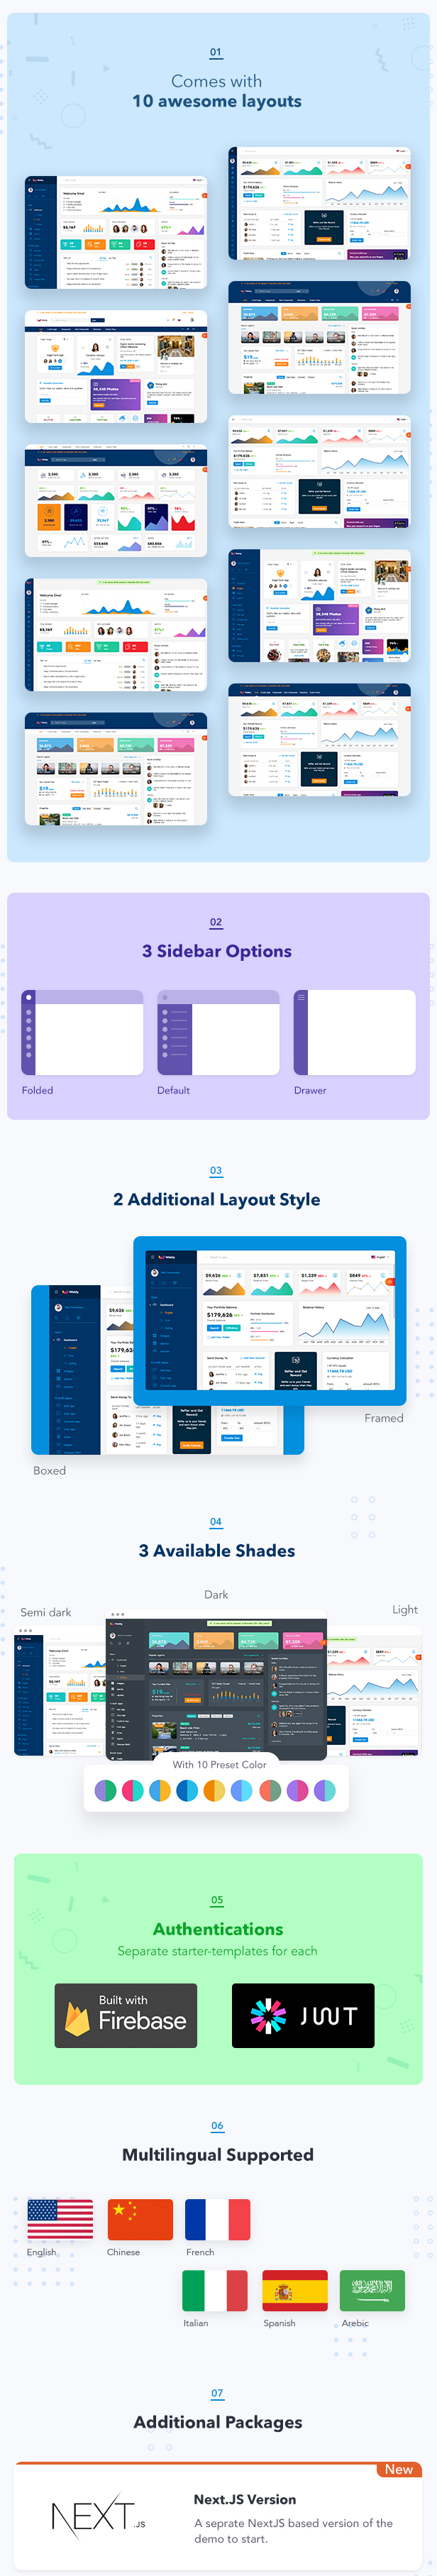 Wieldy - React Admin Template Ant Design and Redux - 2